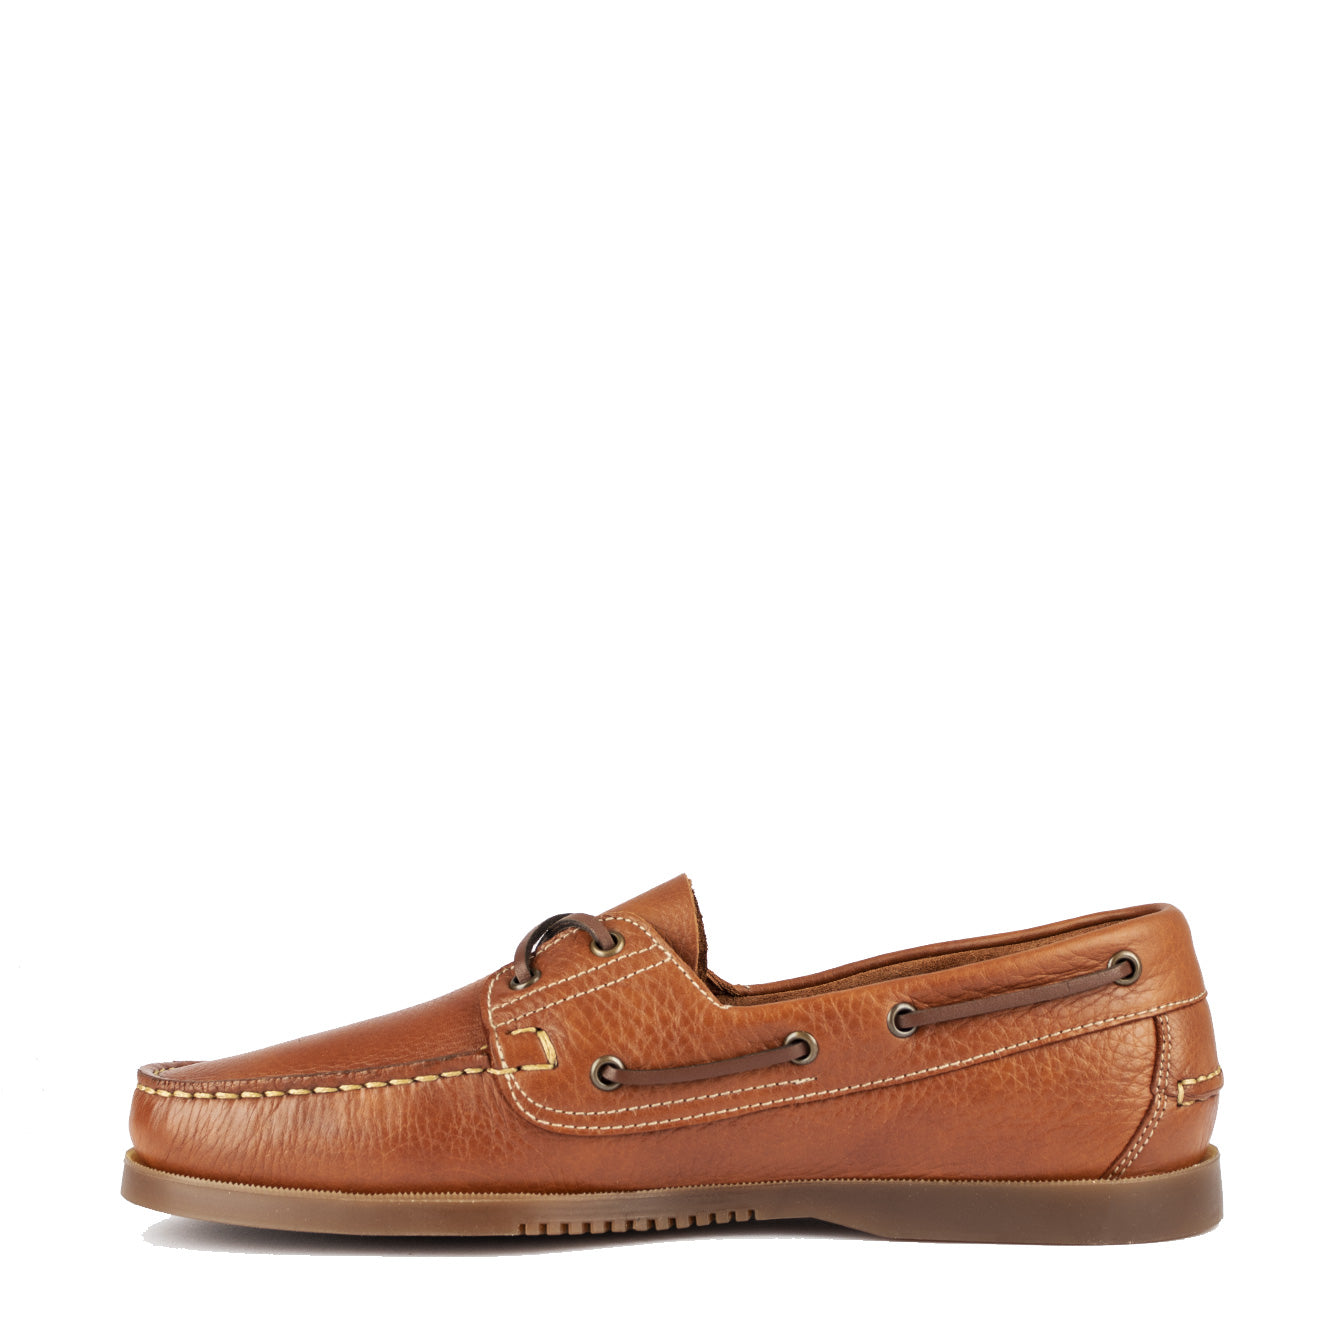 Paraboot Barth Tan Grained Leather | The Sporting Lodge